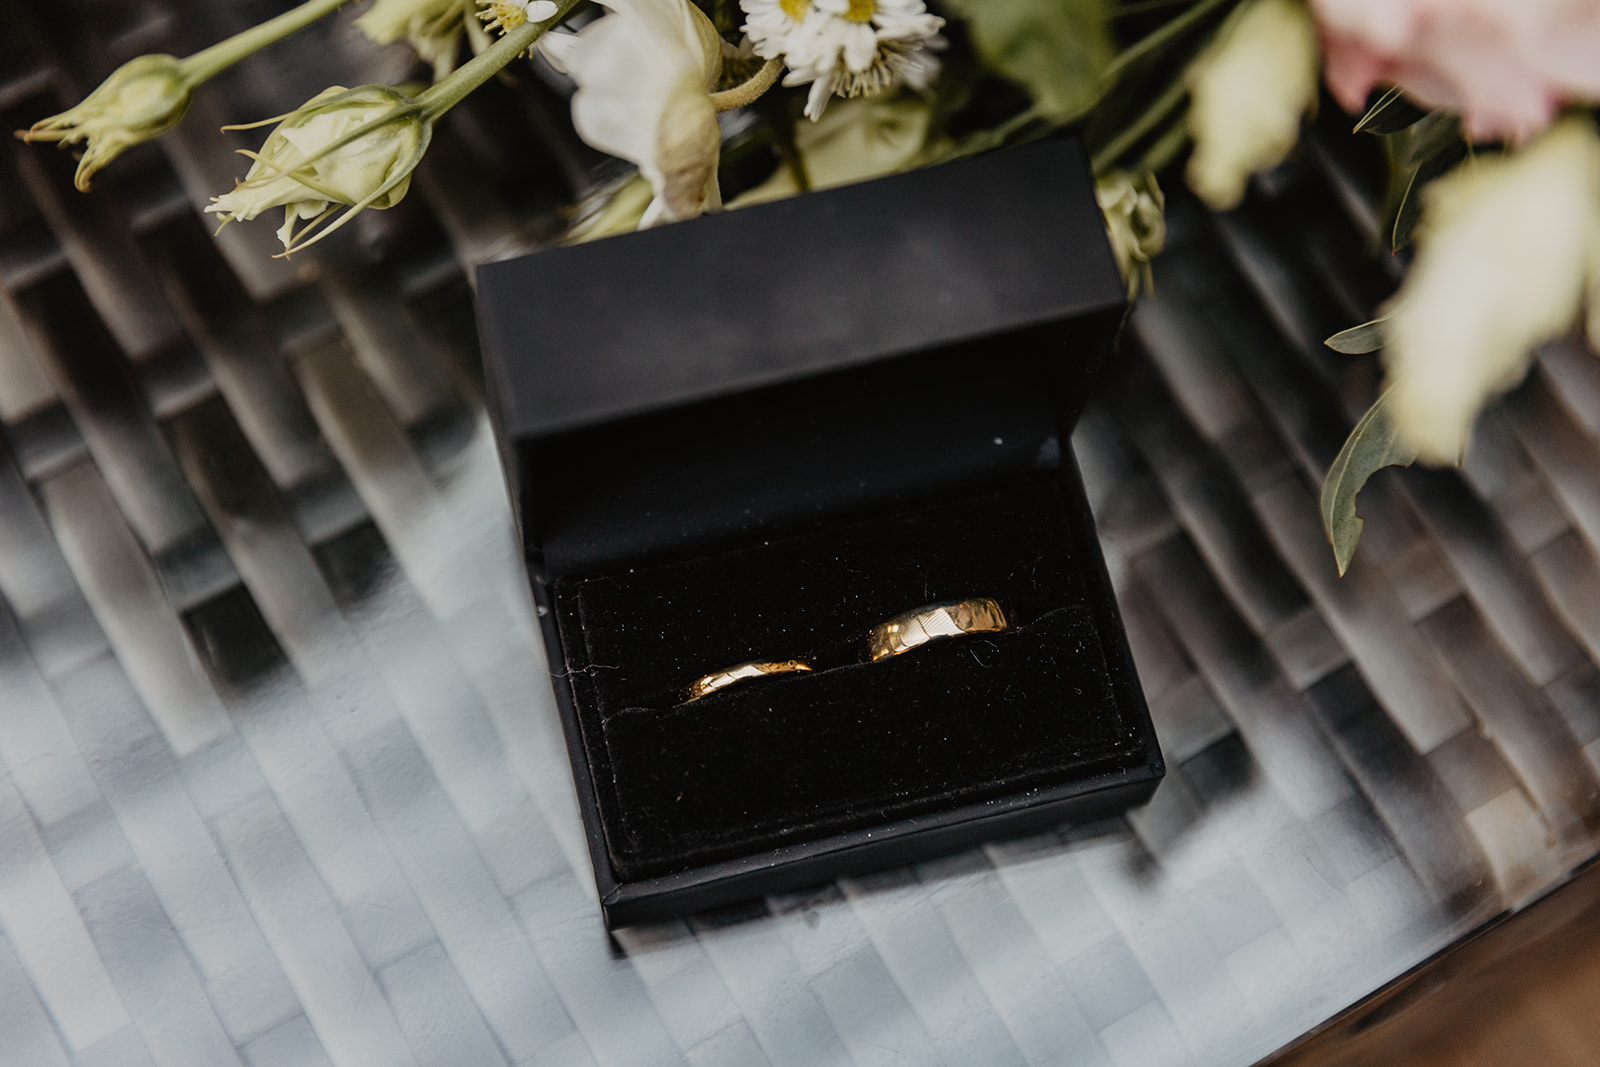 Wedding rings at a Southlands barn wedding, Sussex. Photo by OliveJoy Photography.